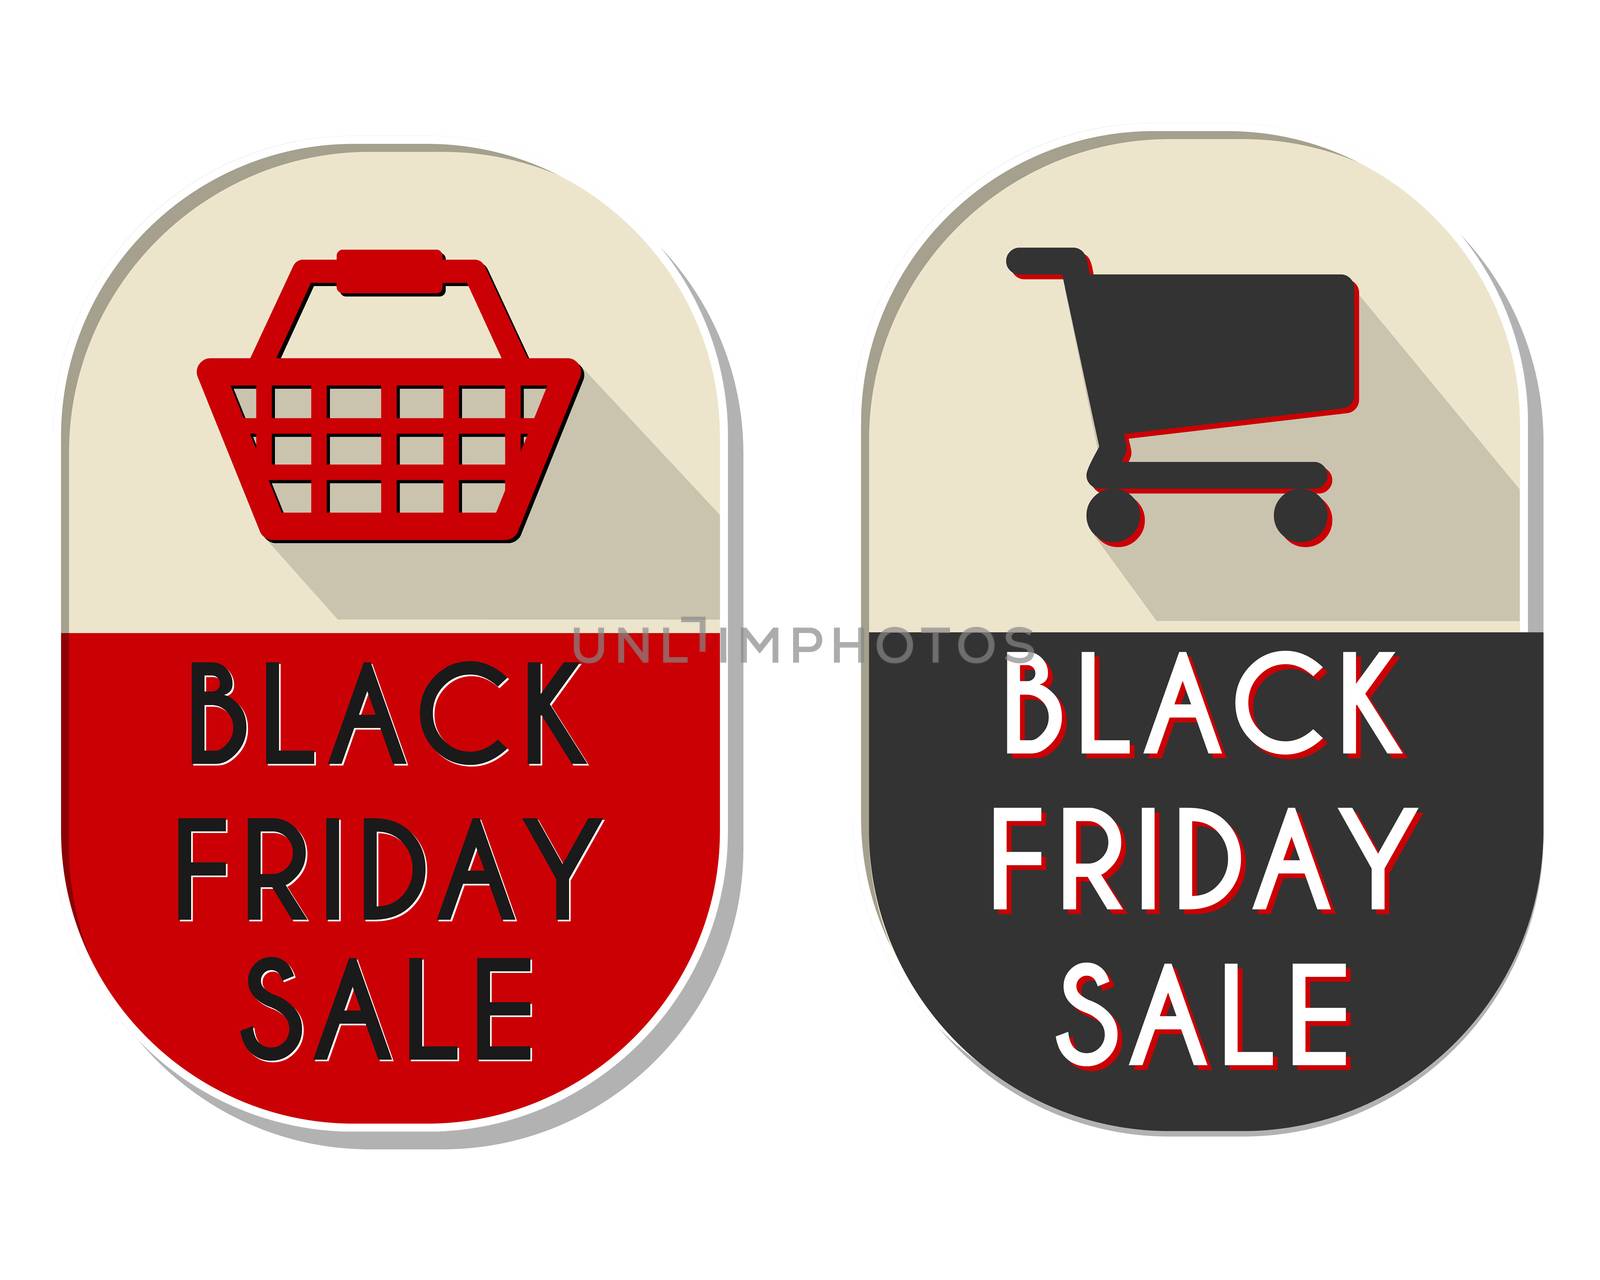 black friday sale with shopping basket and cart signs - two elliptic flat design labels, business holiday commerce concept